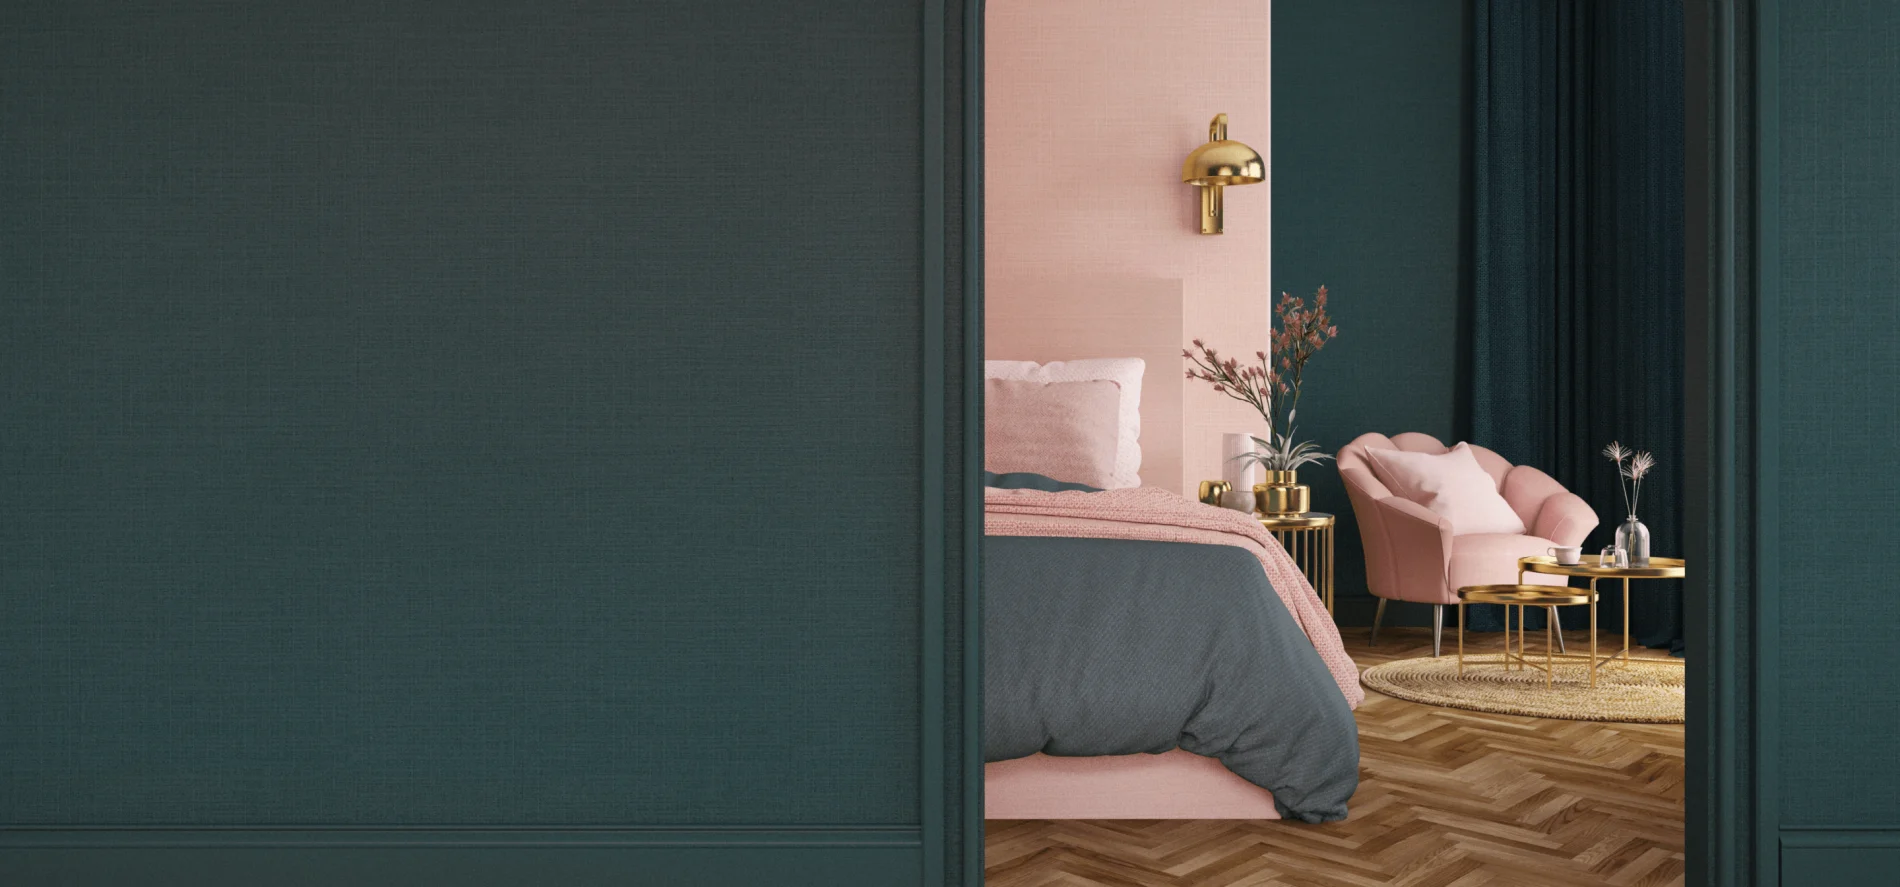 Image of an elegant bedroom with a dark green wall in the foreground